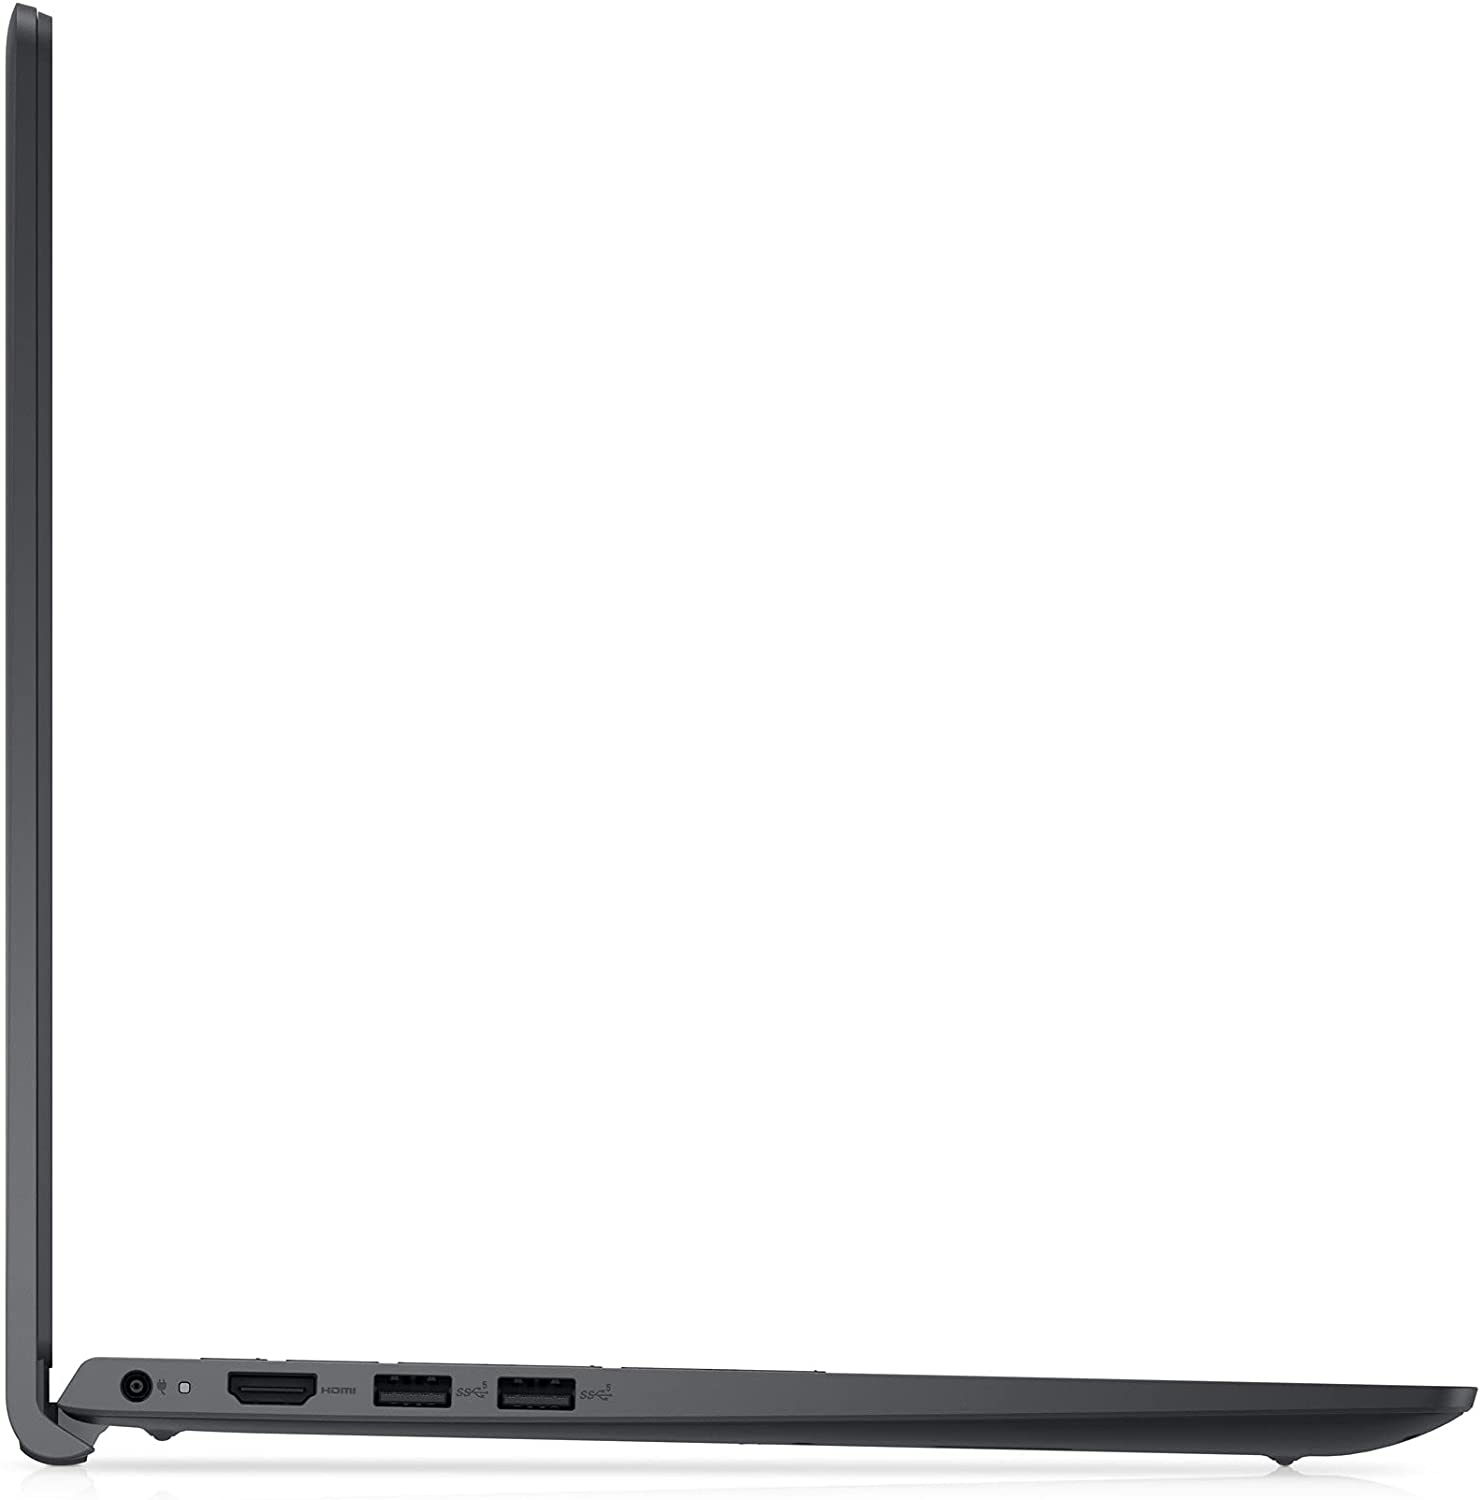 Notebook Dell Inspirion 3511 i7 8Gb SSD 256Gb 15 Free